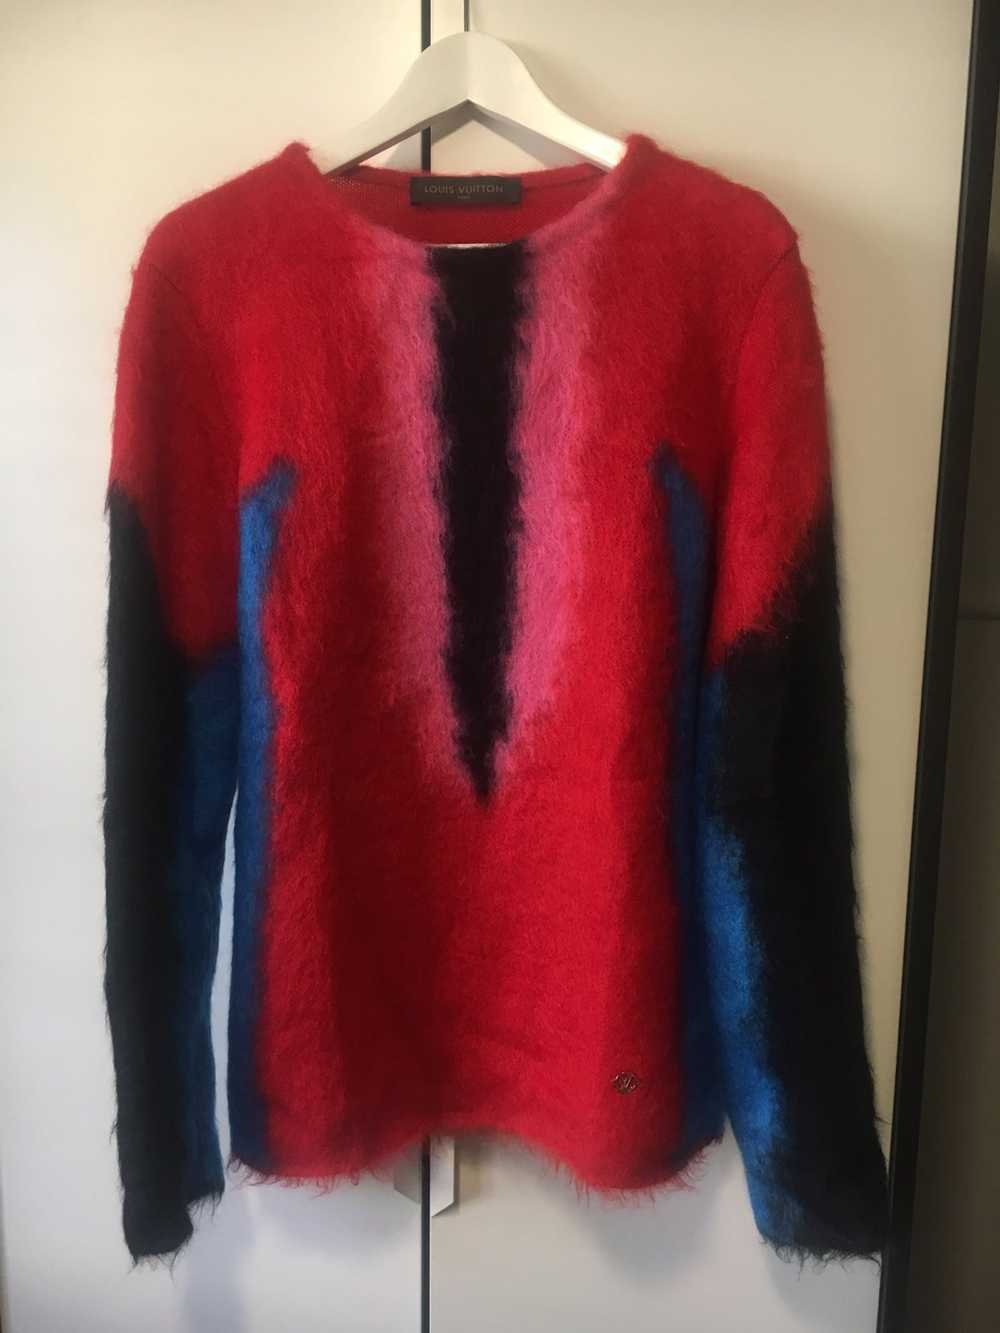 Louis Vuitton SS17 Red Impala Mohair Sweater - image 2